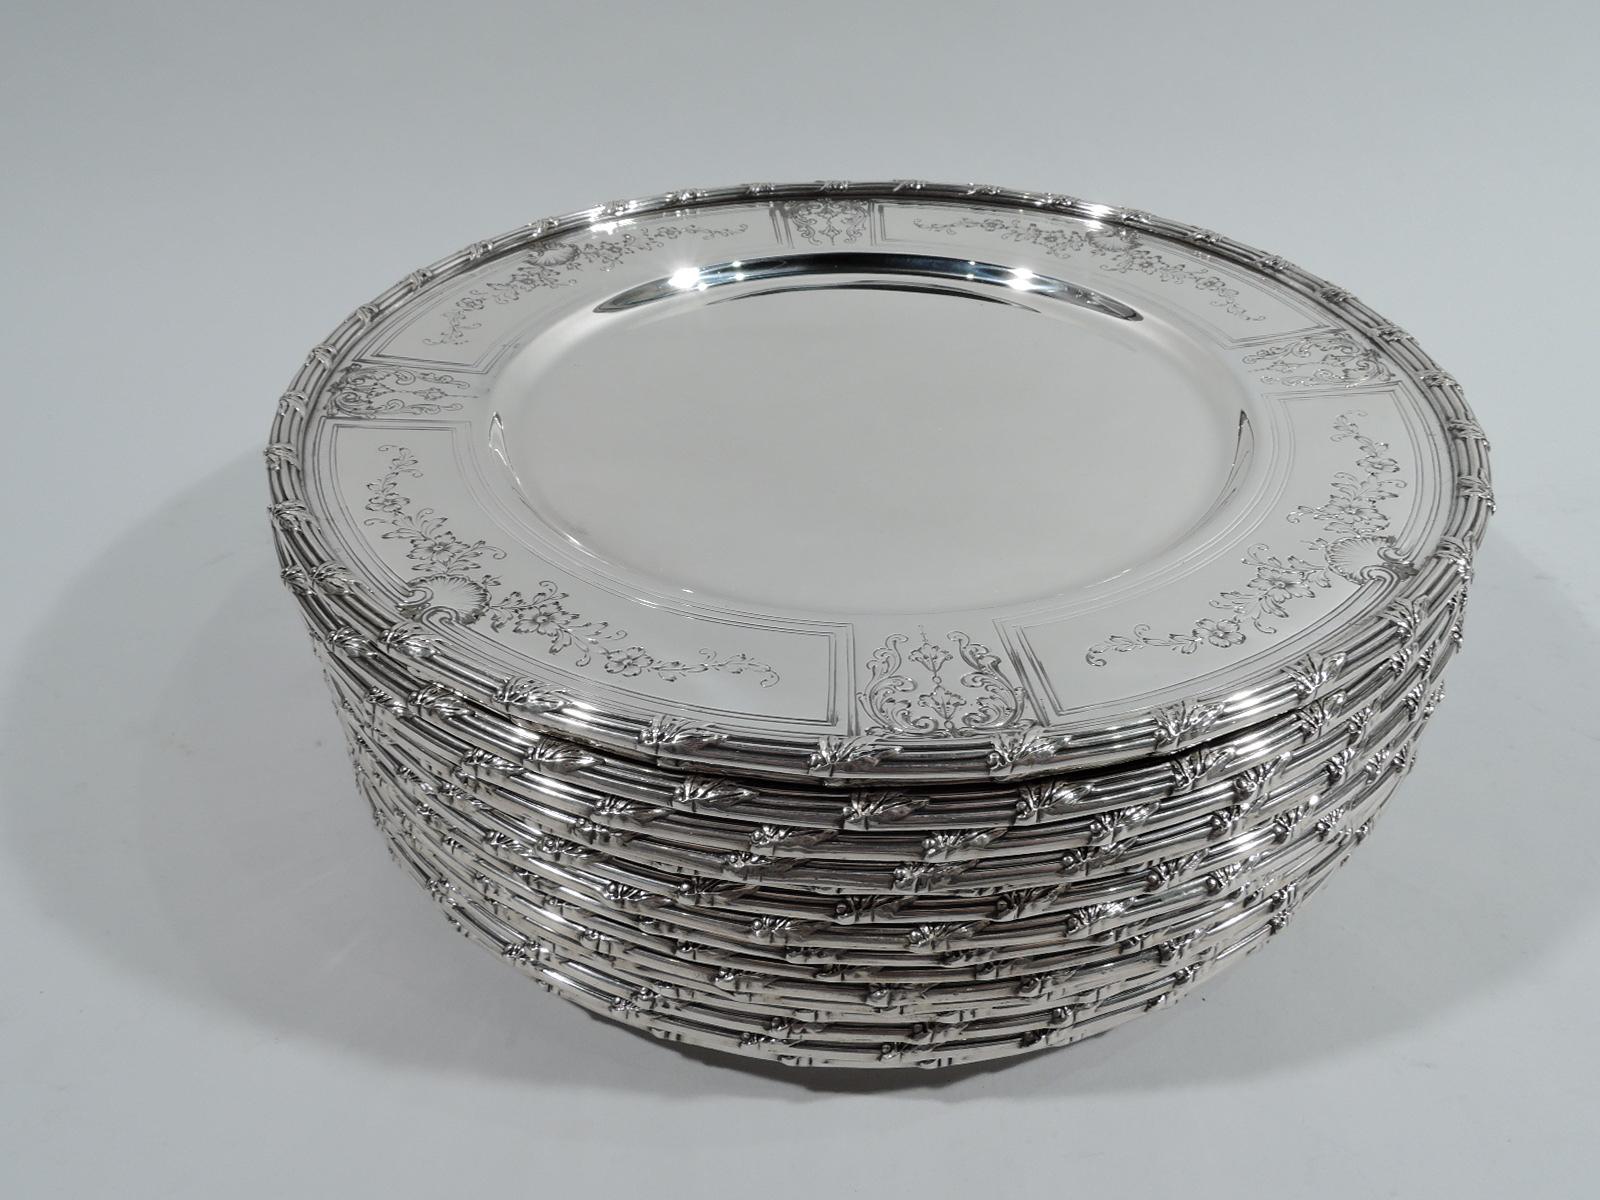 Set of 32 Edwardian sterling silver plates. Made by Durgin (part of Gorham) in Concord, 1927-1929. This set comprises 16 dinner plates and 16 bread and butter plates. Each: Round plain well and tapering shoulder with framed garlands and shells